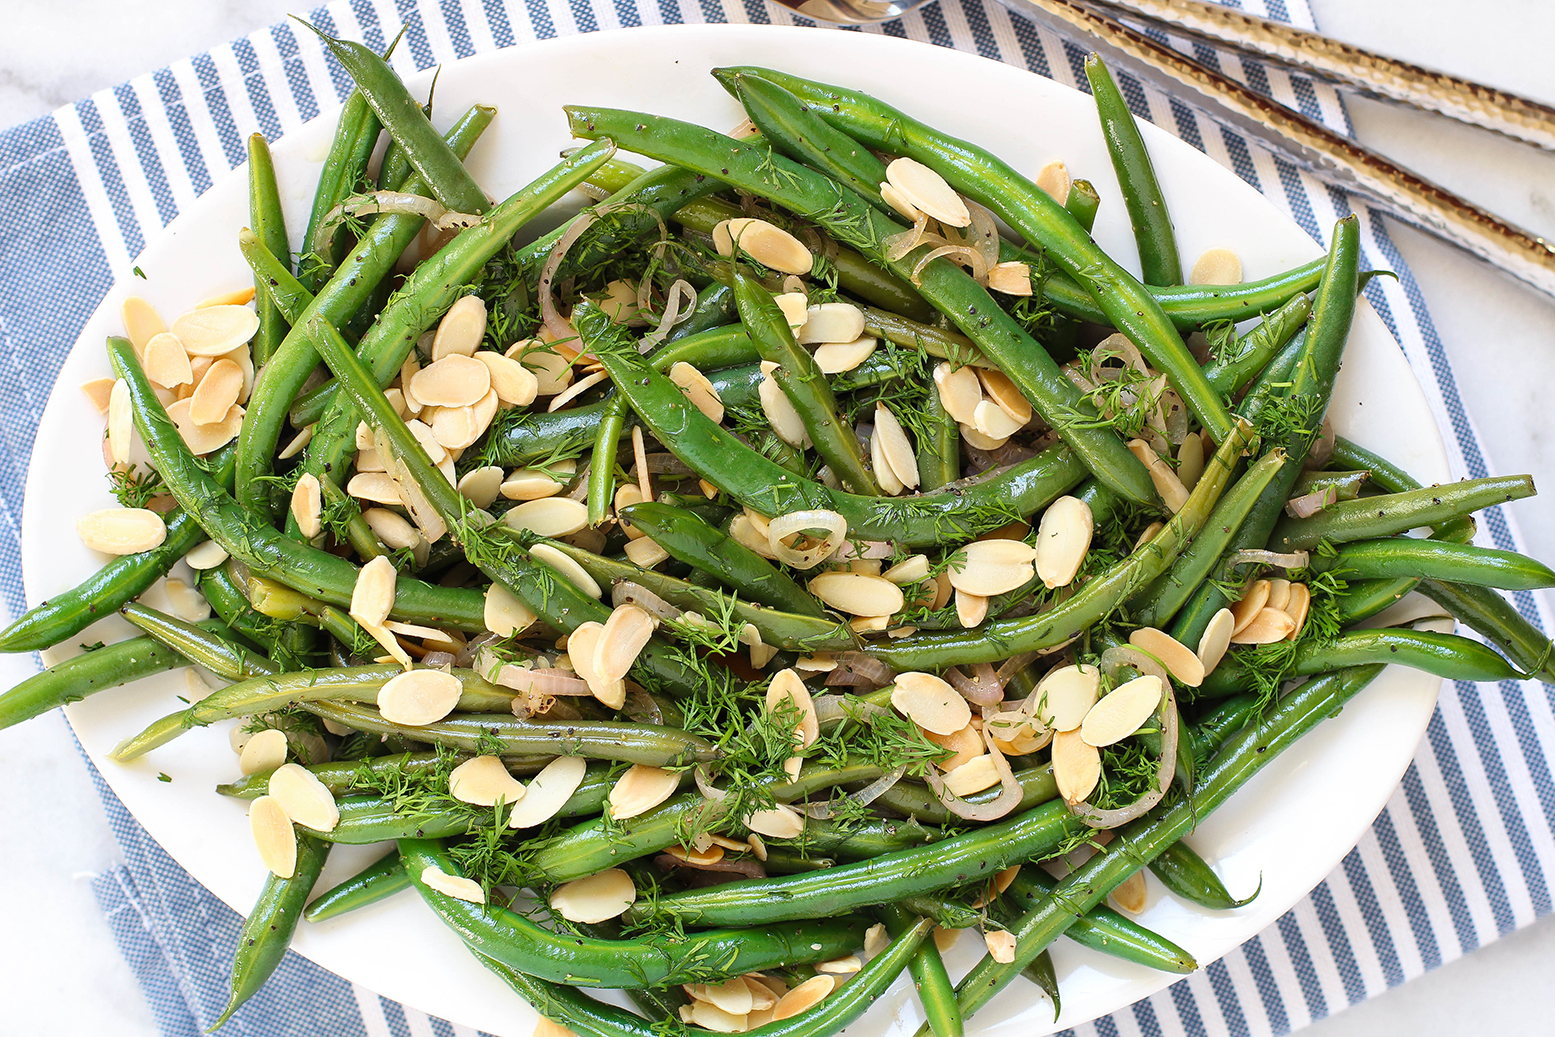 Apple Cider Green Beans with shallots & dill - an easy vegan & gluten free holiday side